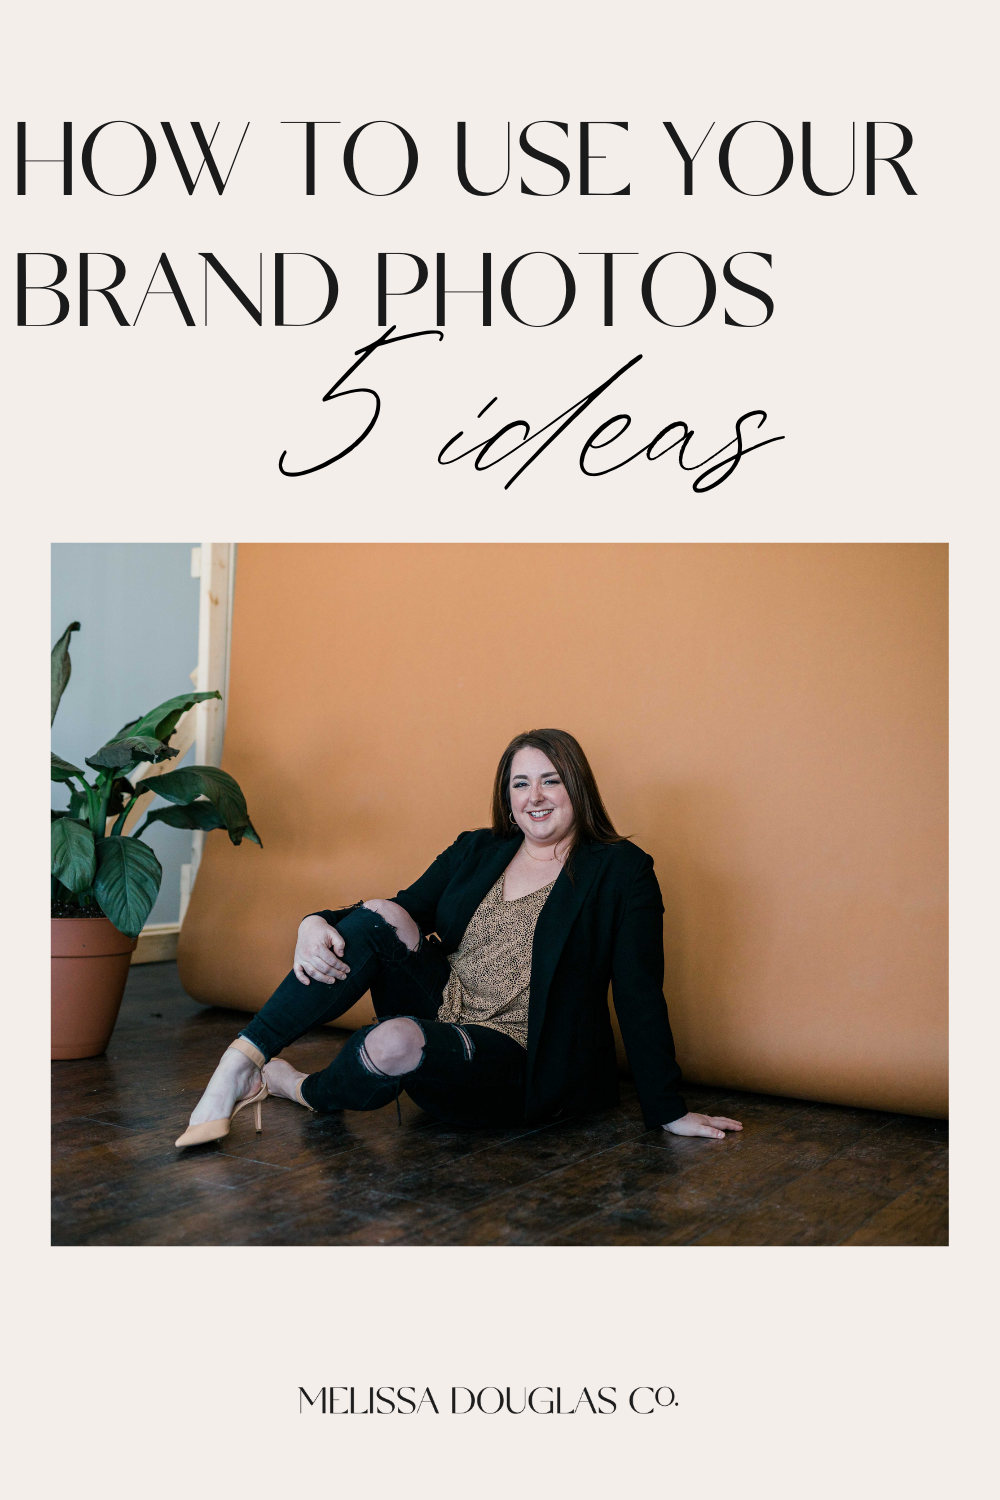 amanda may designs at west photo studio ferndale michigan how to use your brand photos